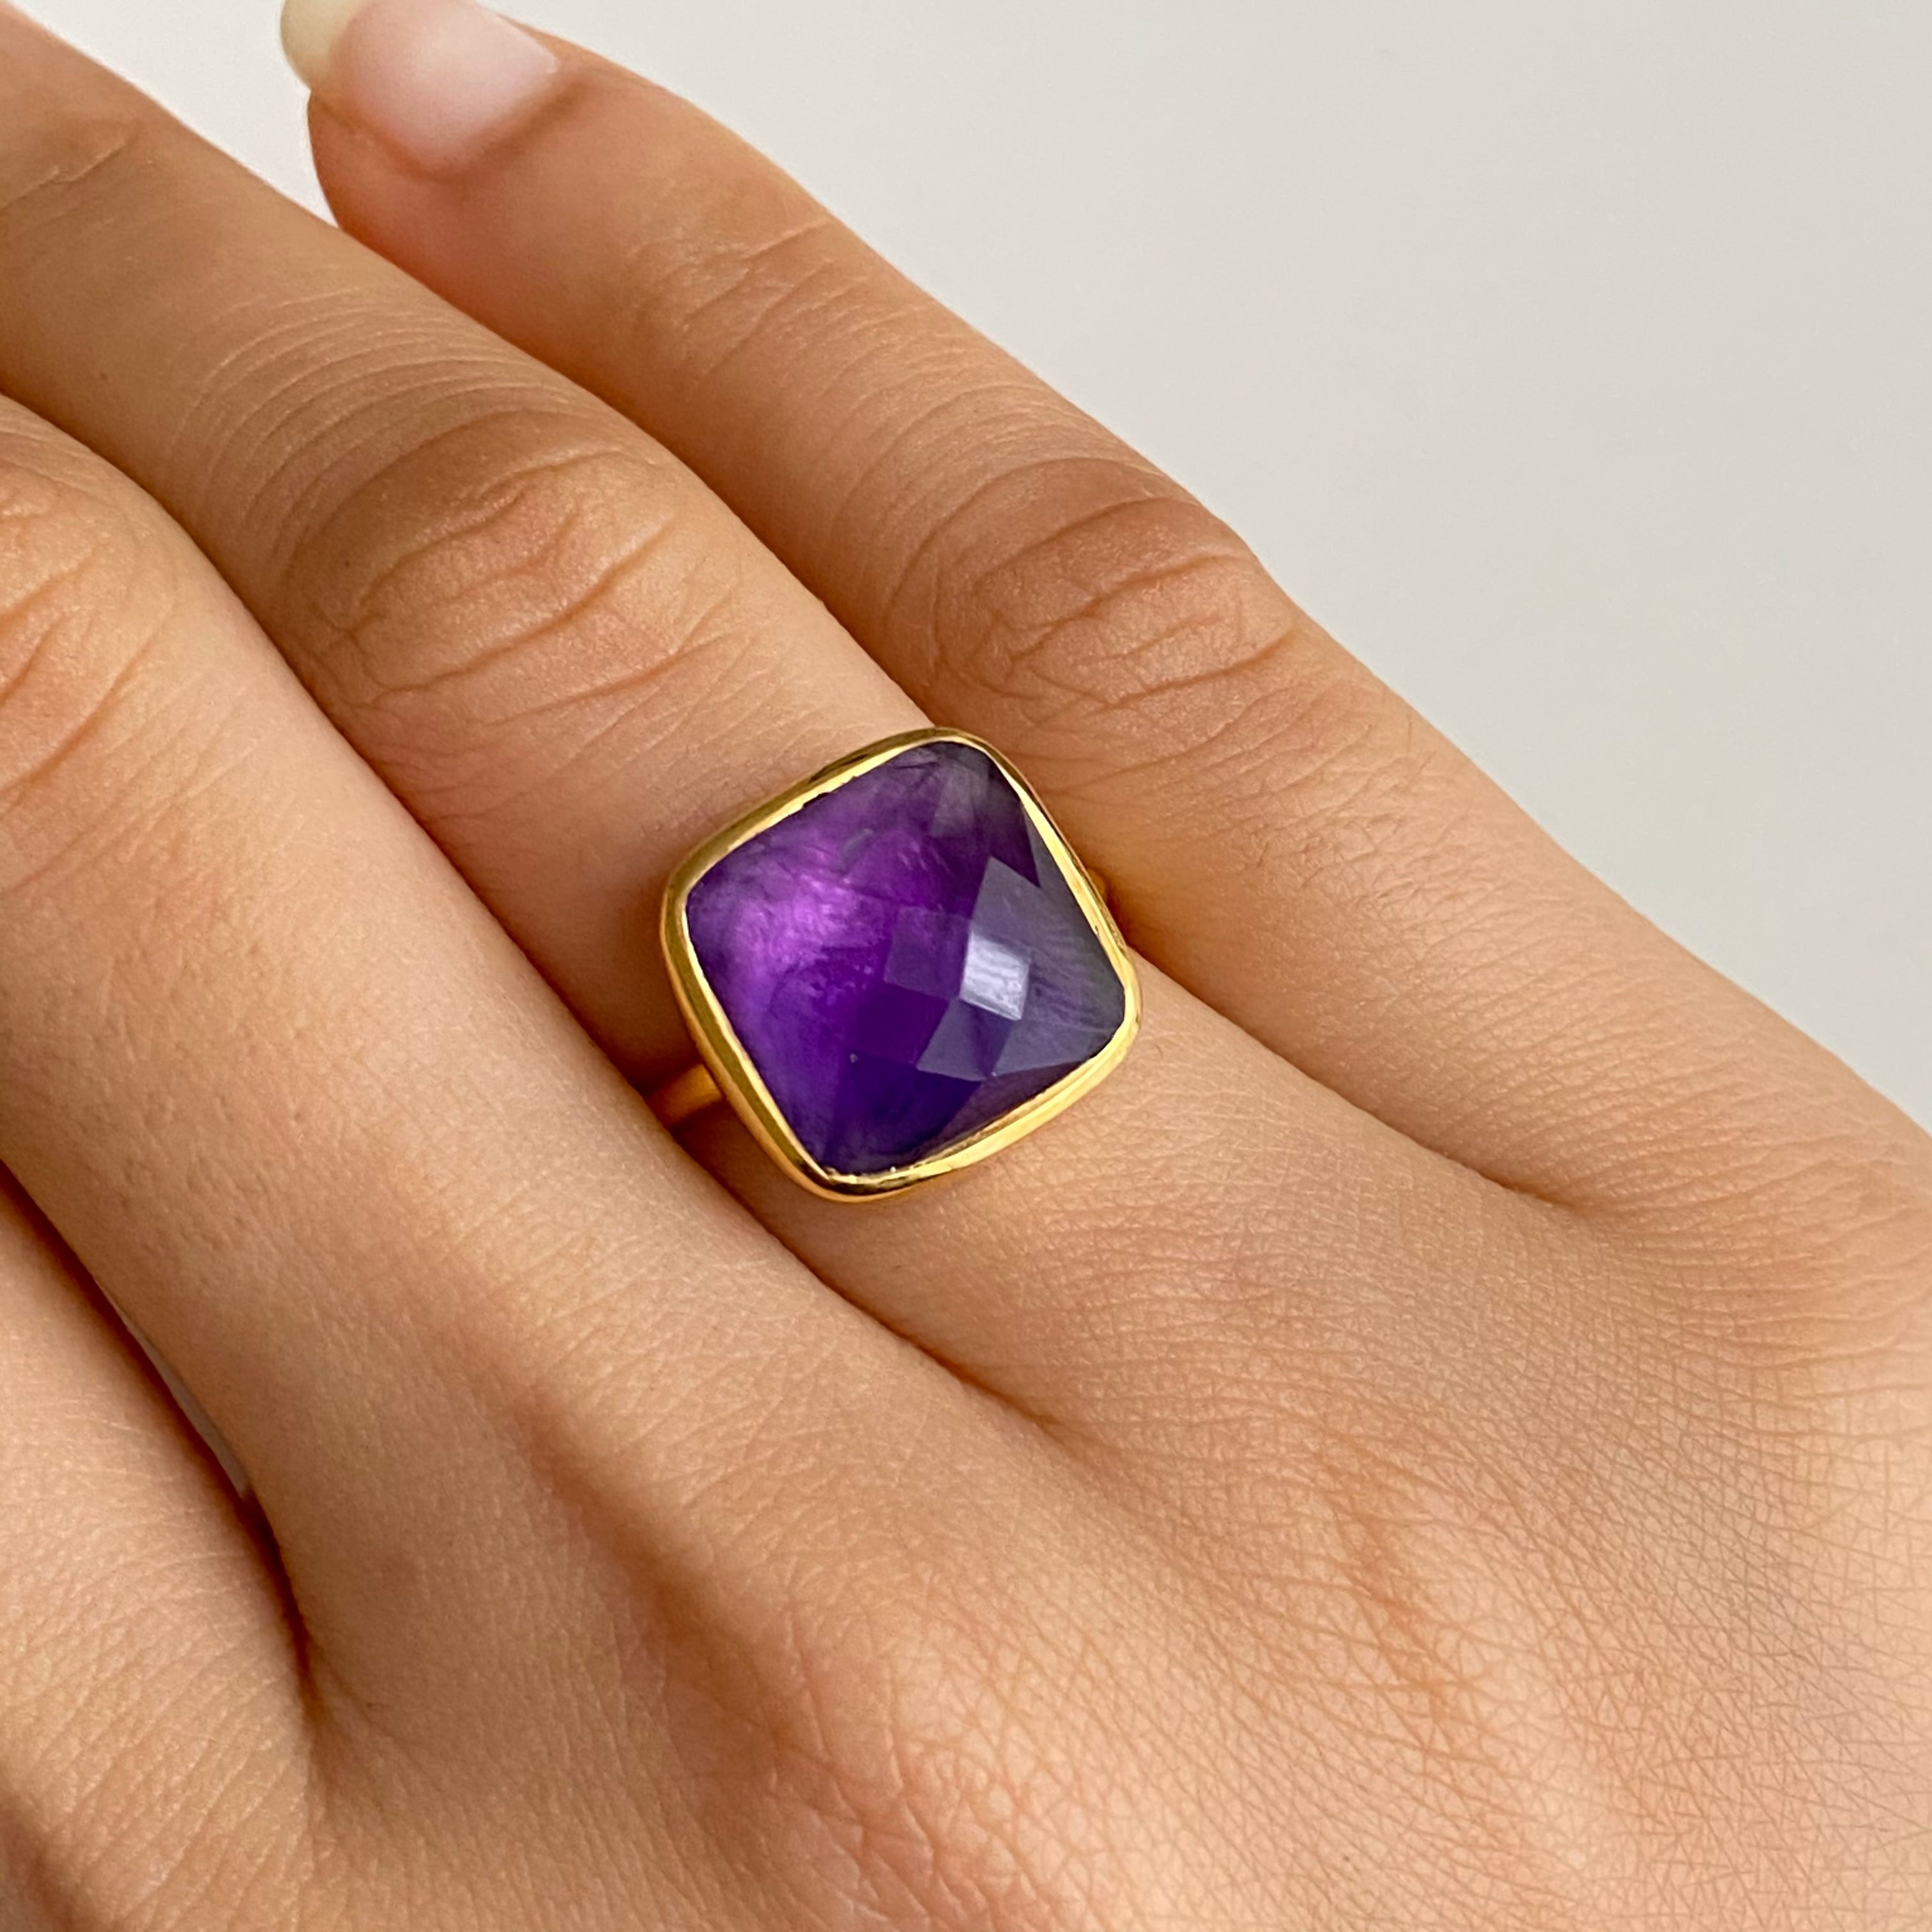 Gold Plated Silver Ring with Square Amethyst Stone 